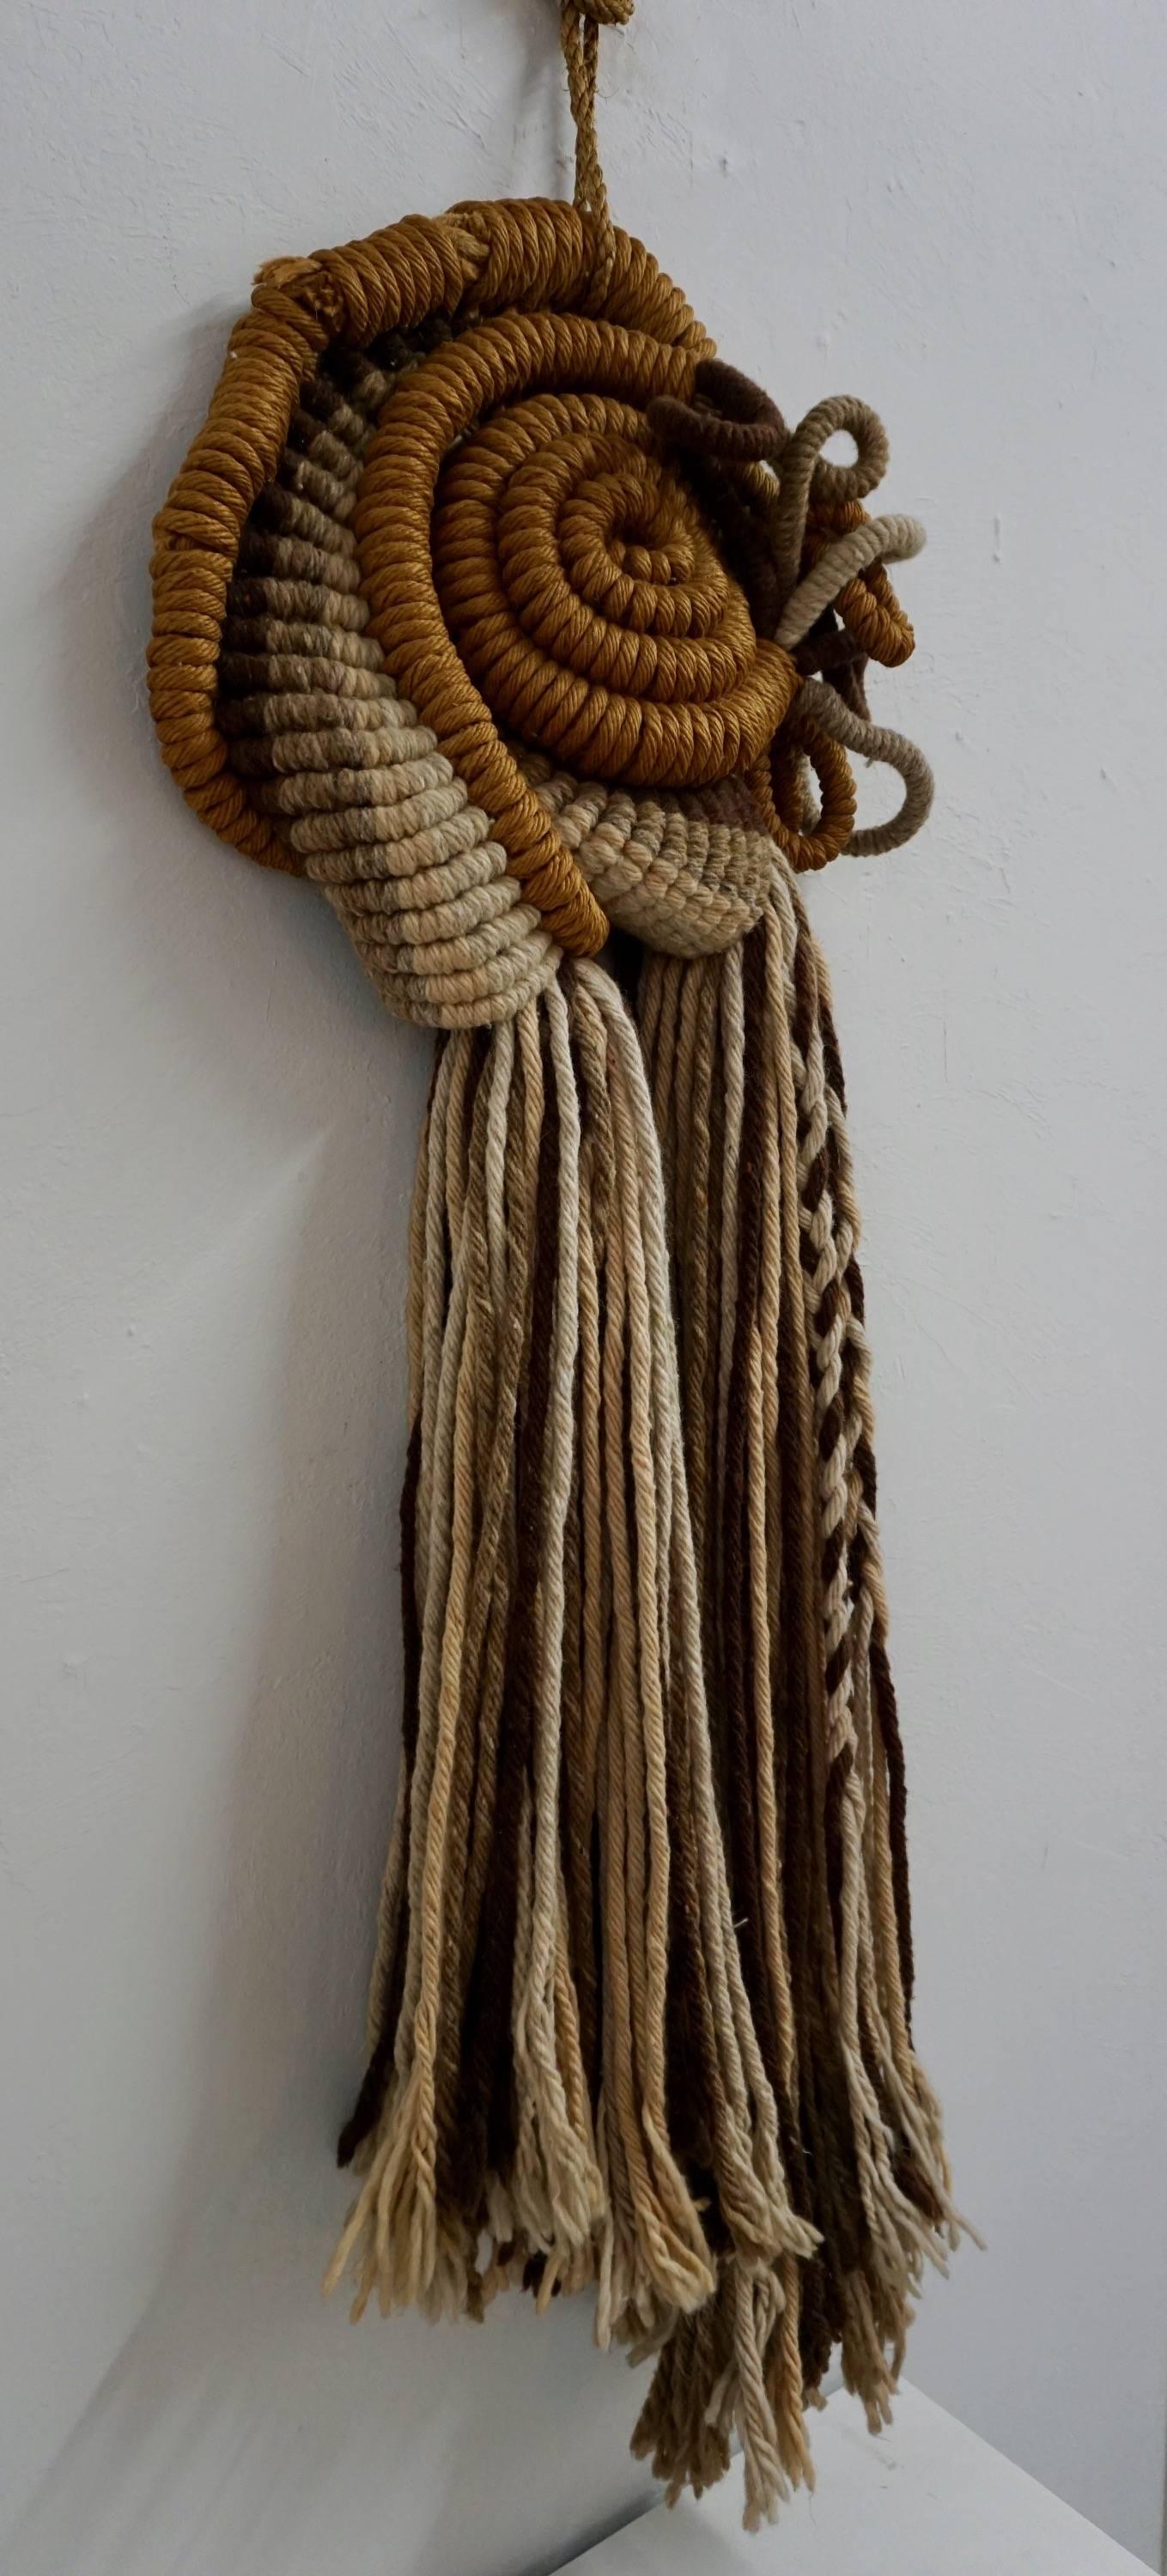 Unusual combination of rope, yarn and twine creating a very interesting wall hanging.